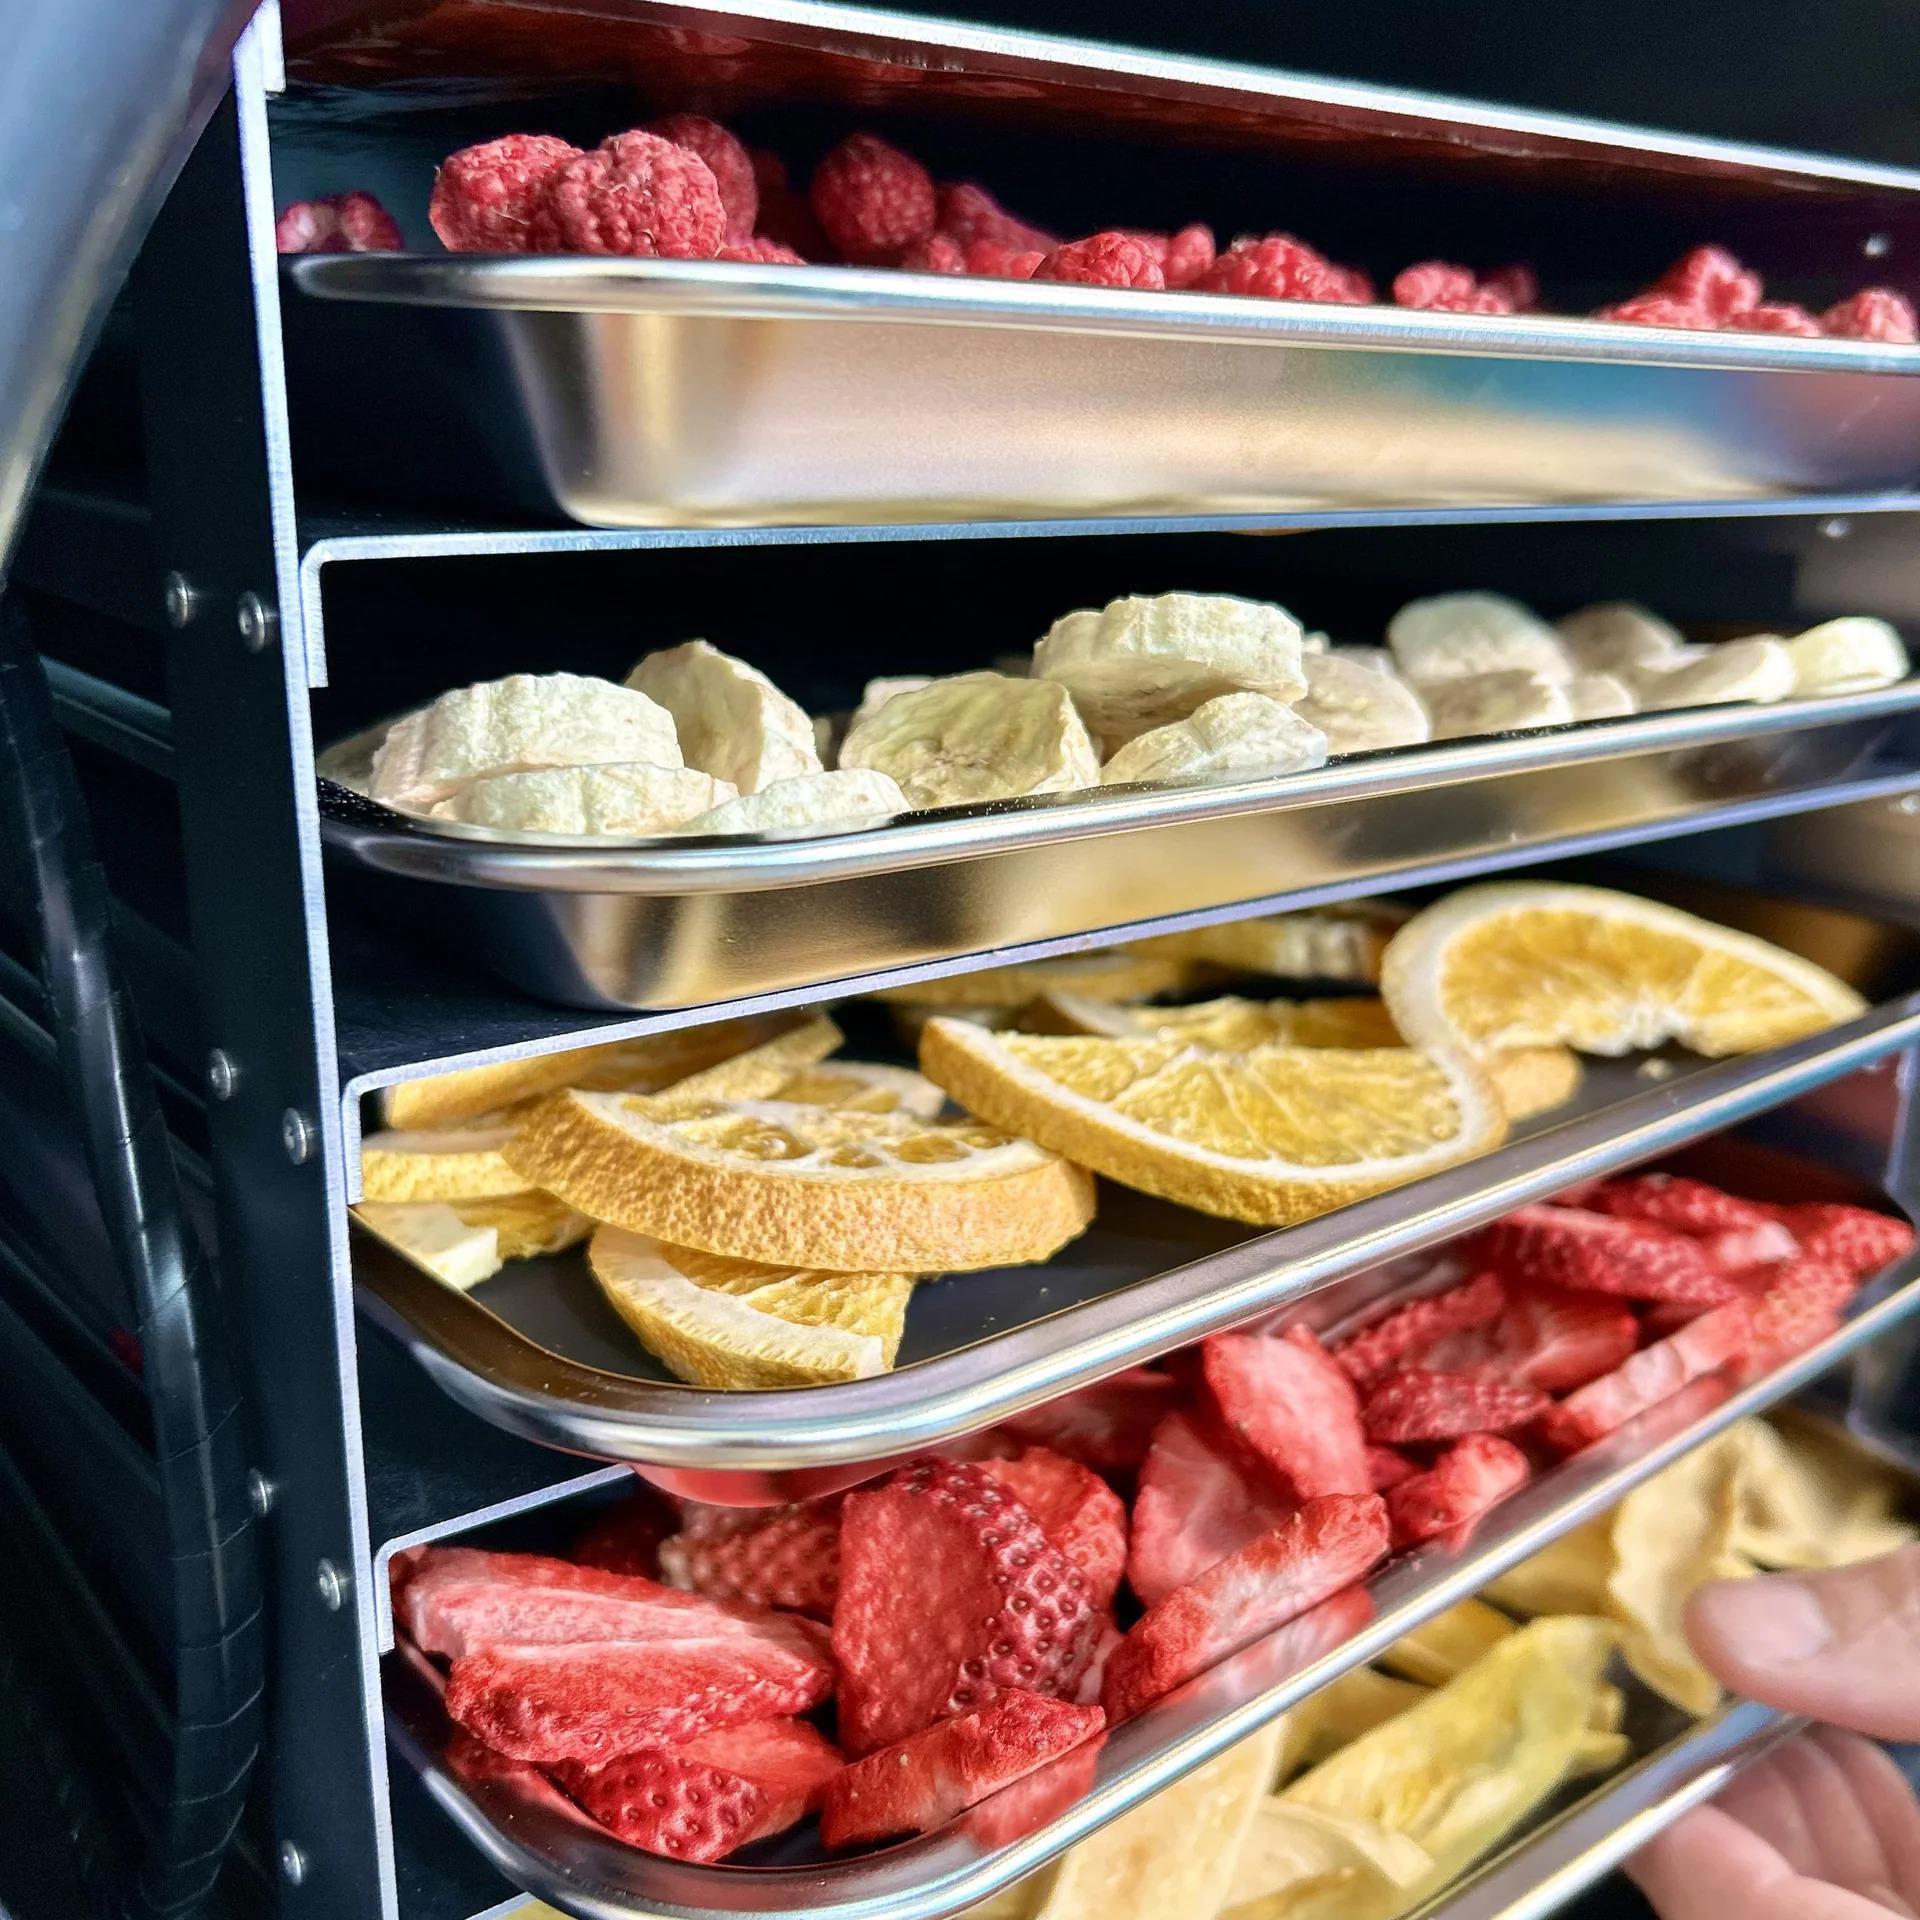 This image showcases a variety of dried fruits neatly arranged in a modern BLUE ALPINE dehydrator. The vibrant colors of the fruits contrast beautifully against the sleek, metallic surface of the appliance, making it visually appealing and indicative of a healthy, nutritious snack preparation.